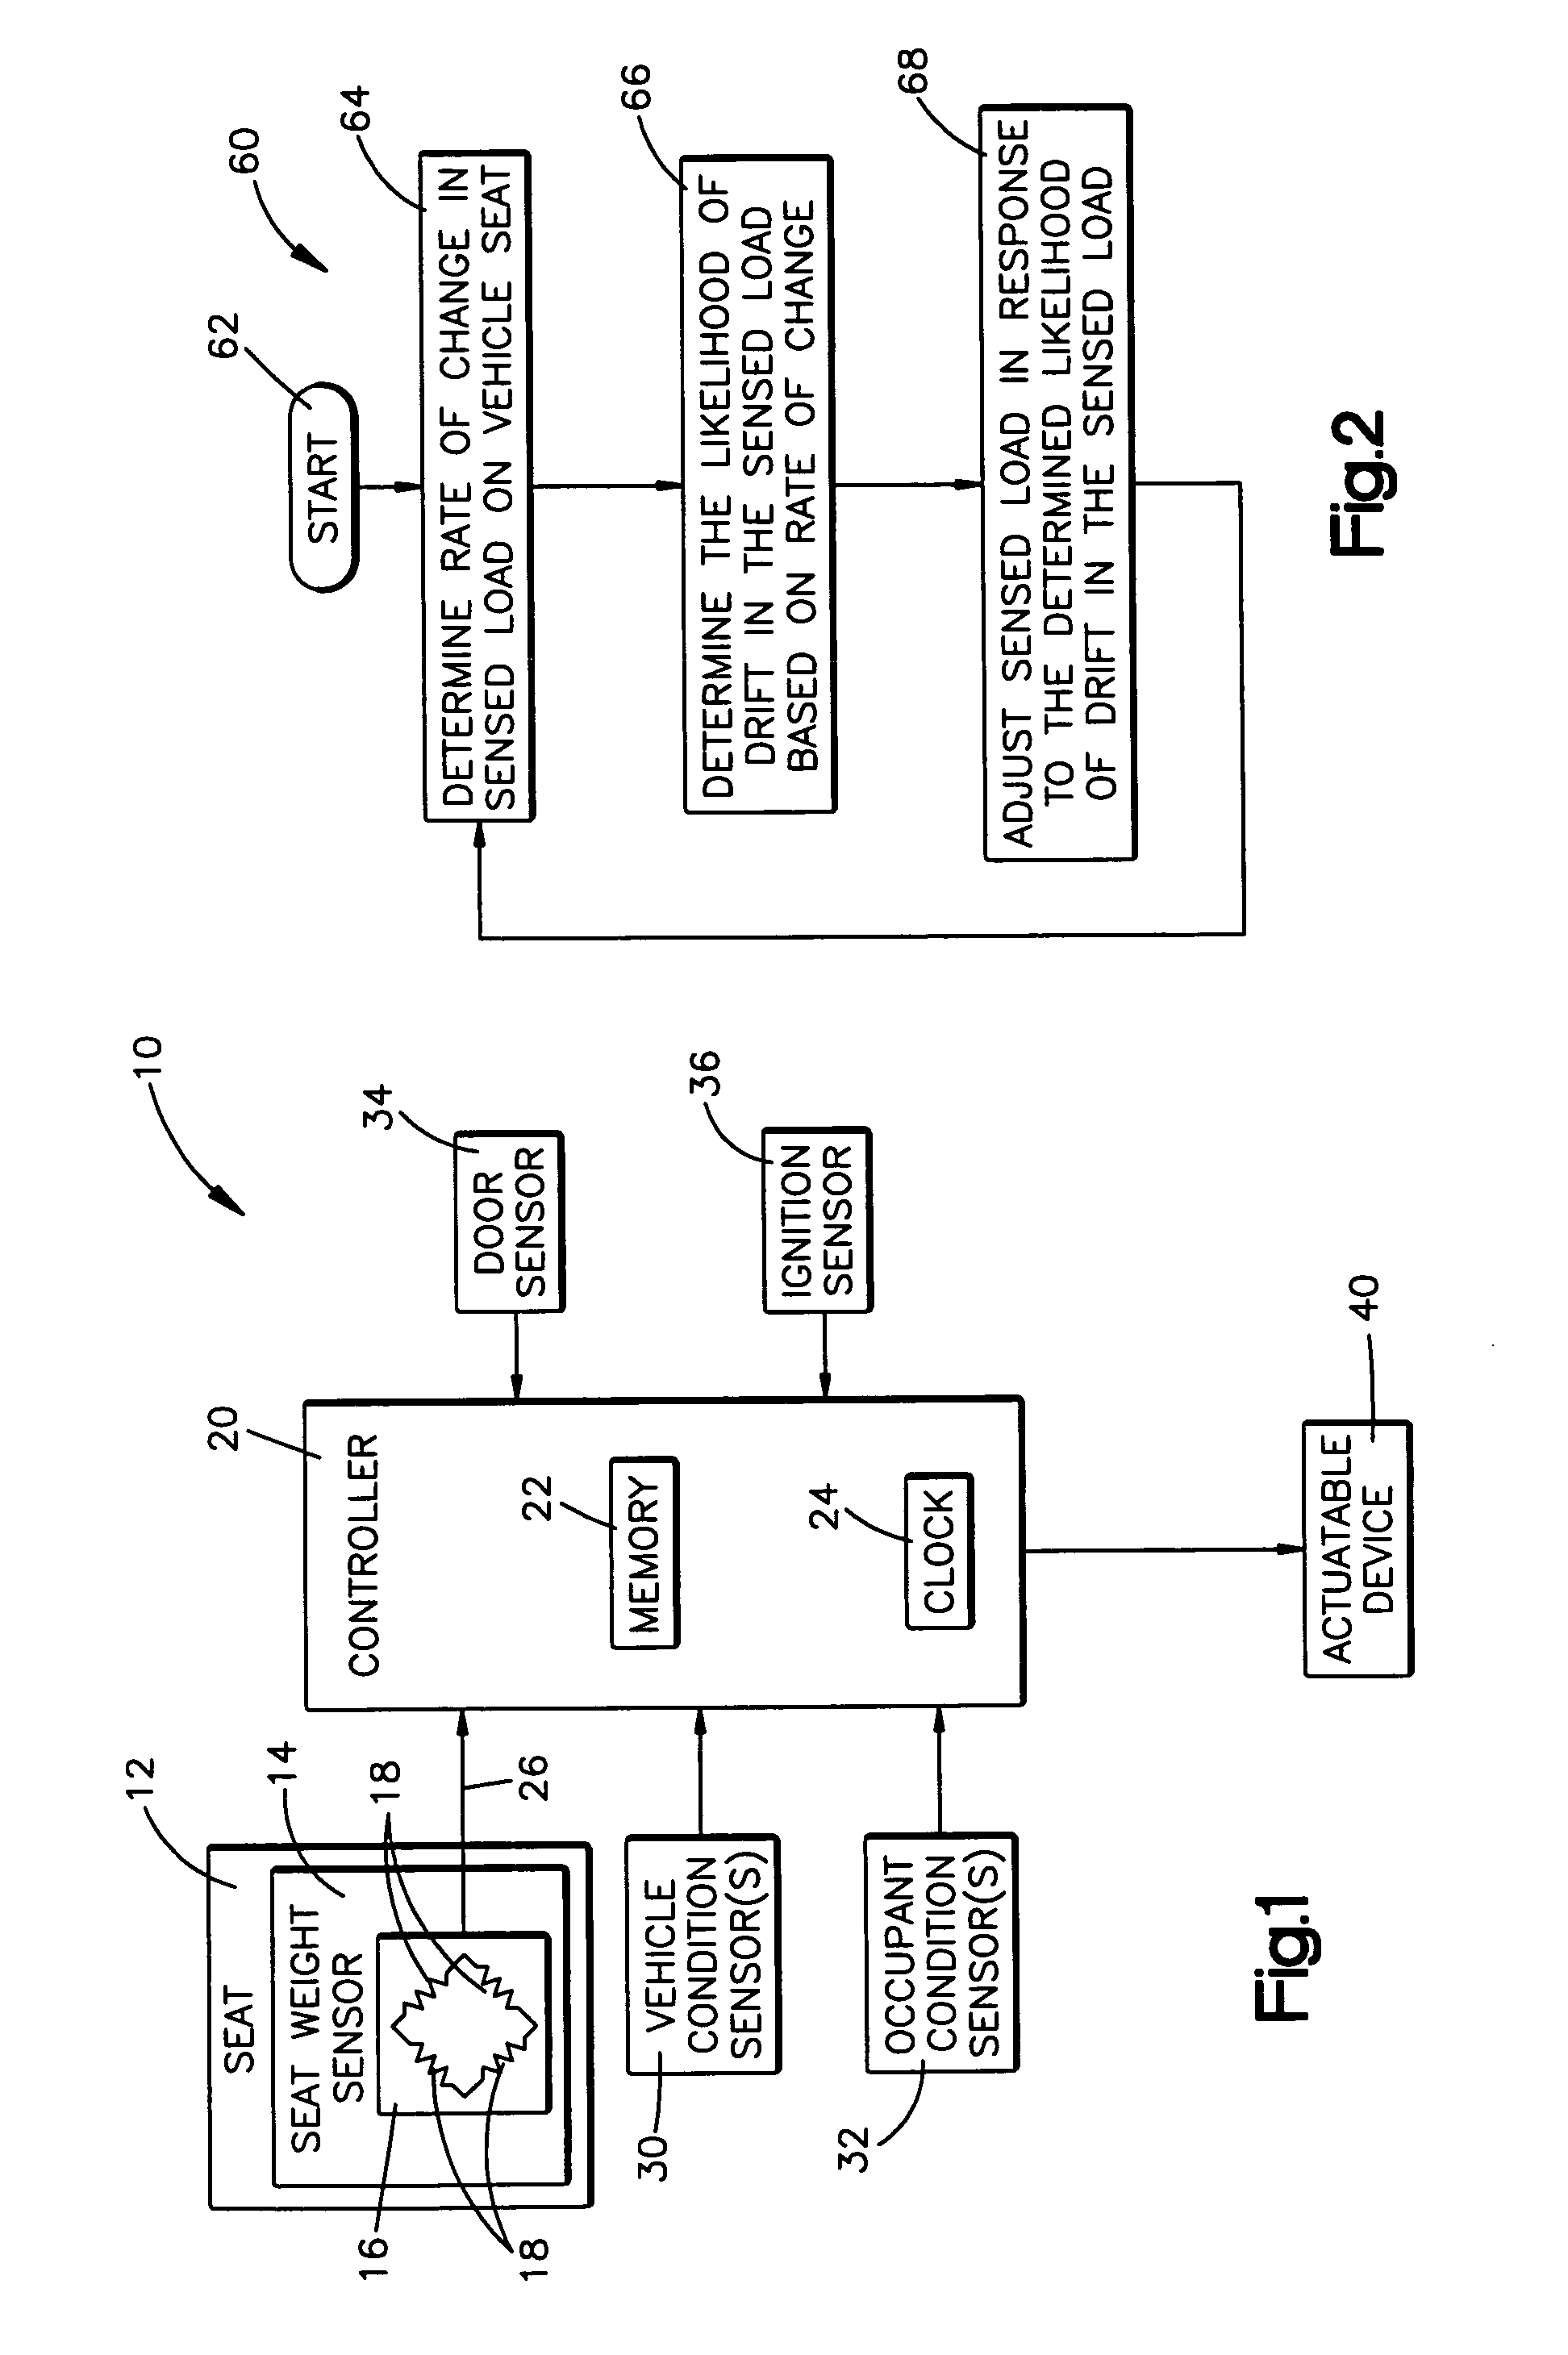 System and method for drift compensation in a seat load sensing system